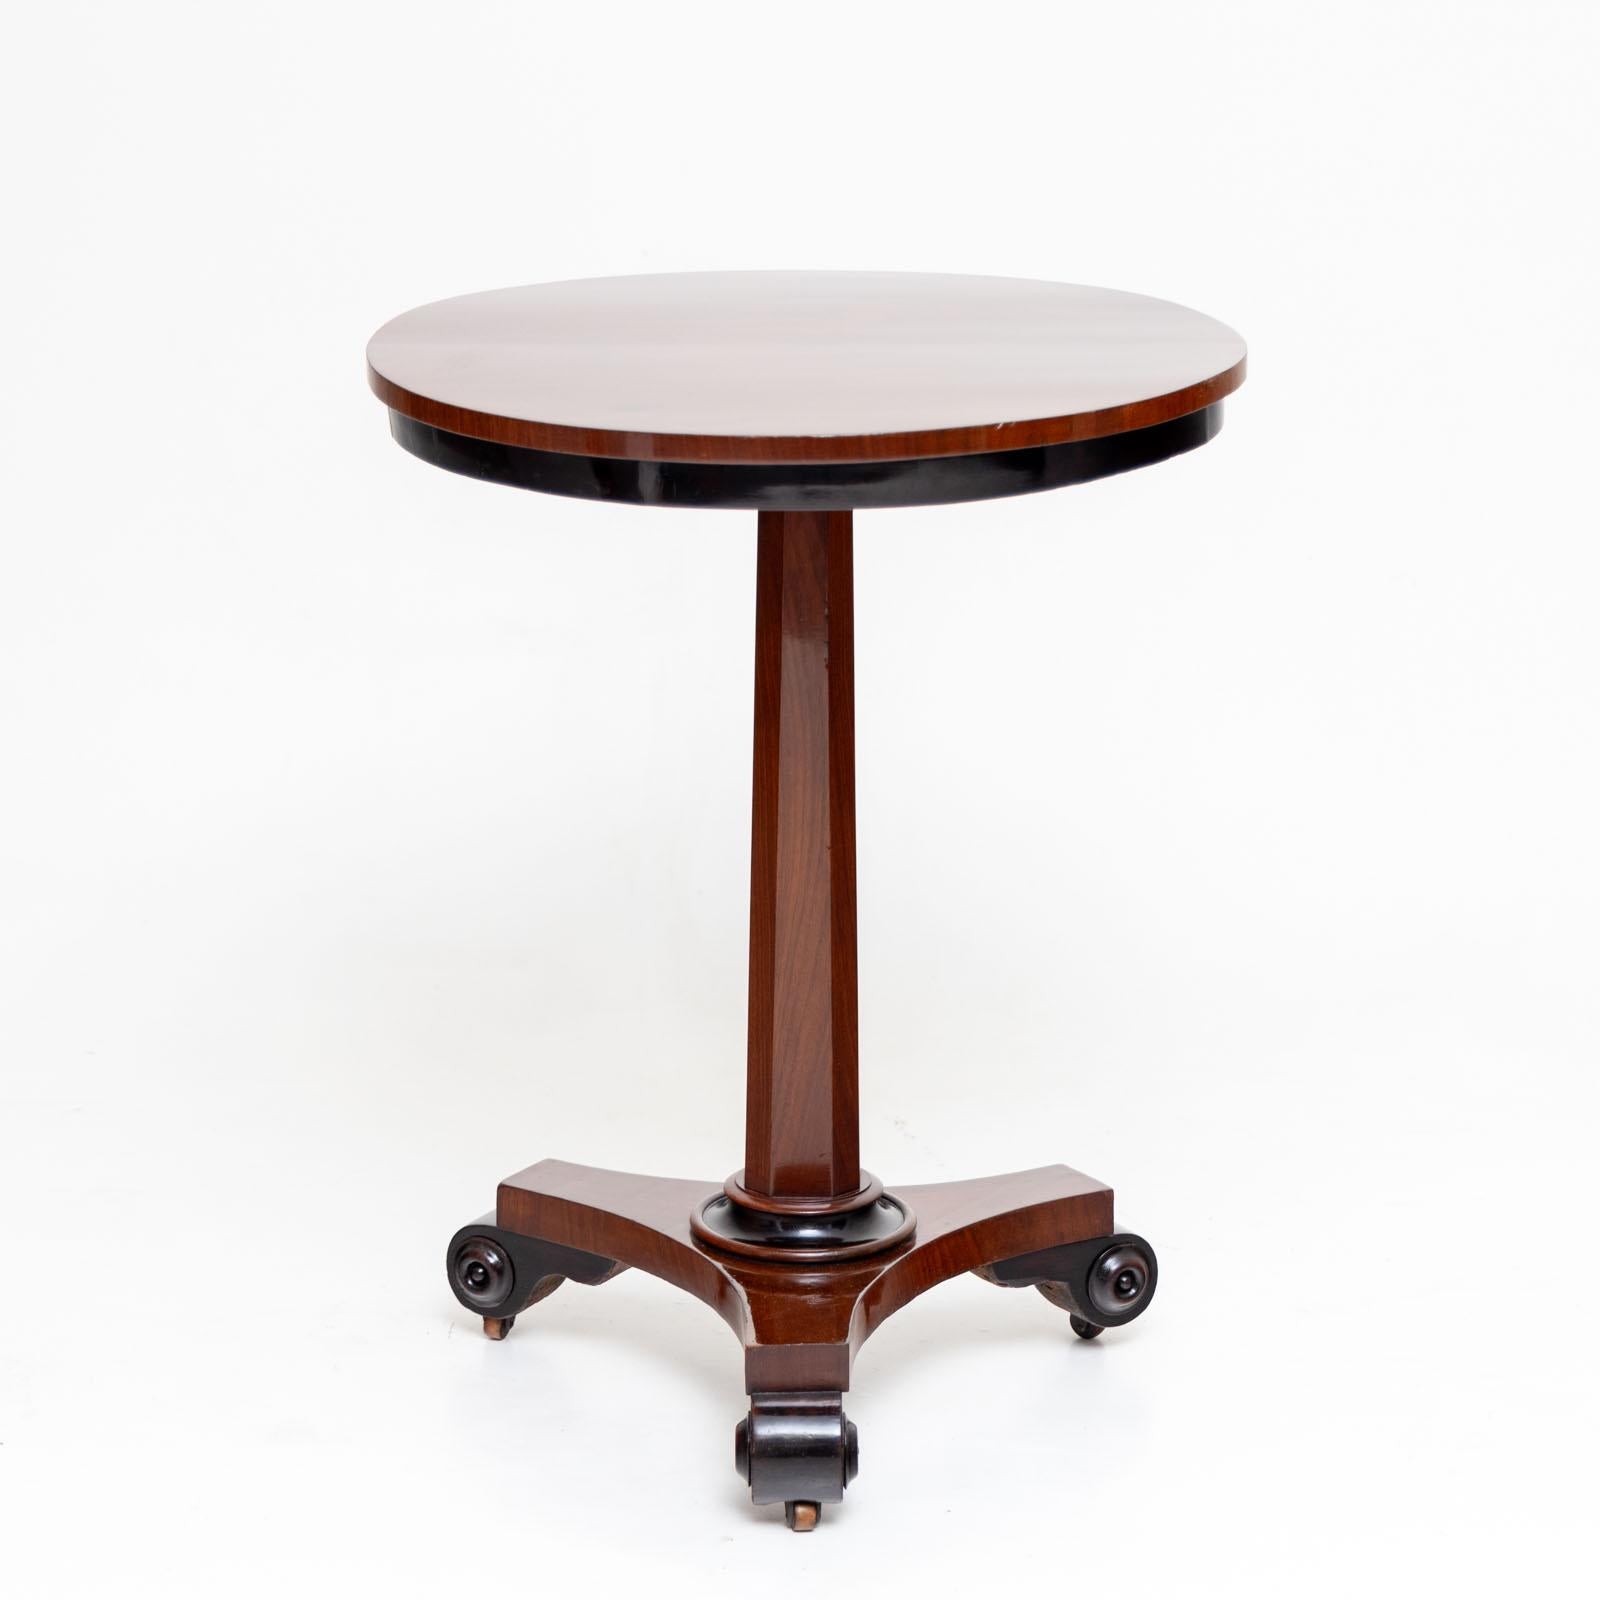 Small gueridon on castors with blackened volute legs and a tripod base. An octagonal, smooth column rises above it, supporting the round table top with a dark frame. The table has been restored and polished by hand.